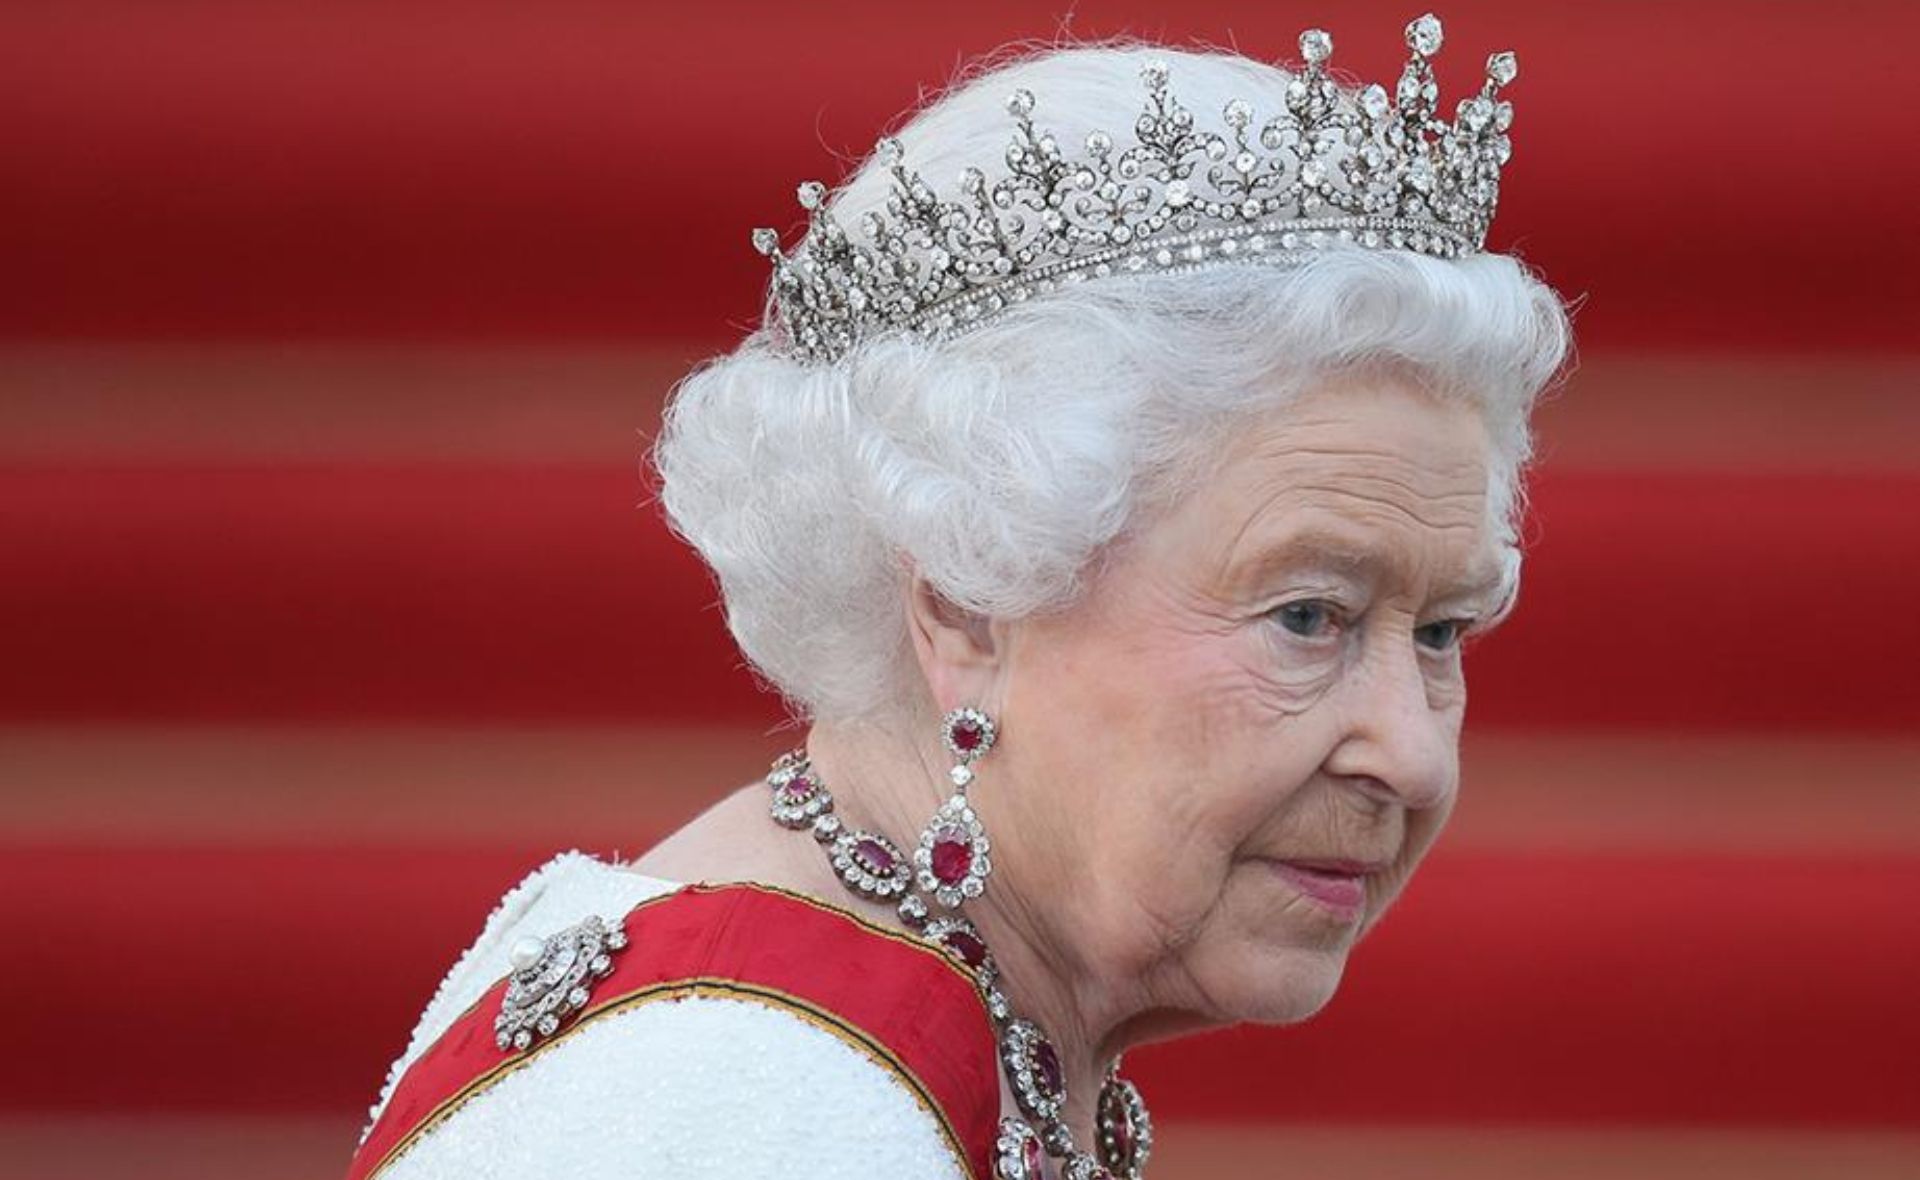 How has the line of succession changed after the death of Queen Elizabeth II?